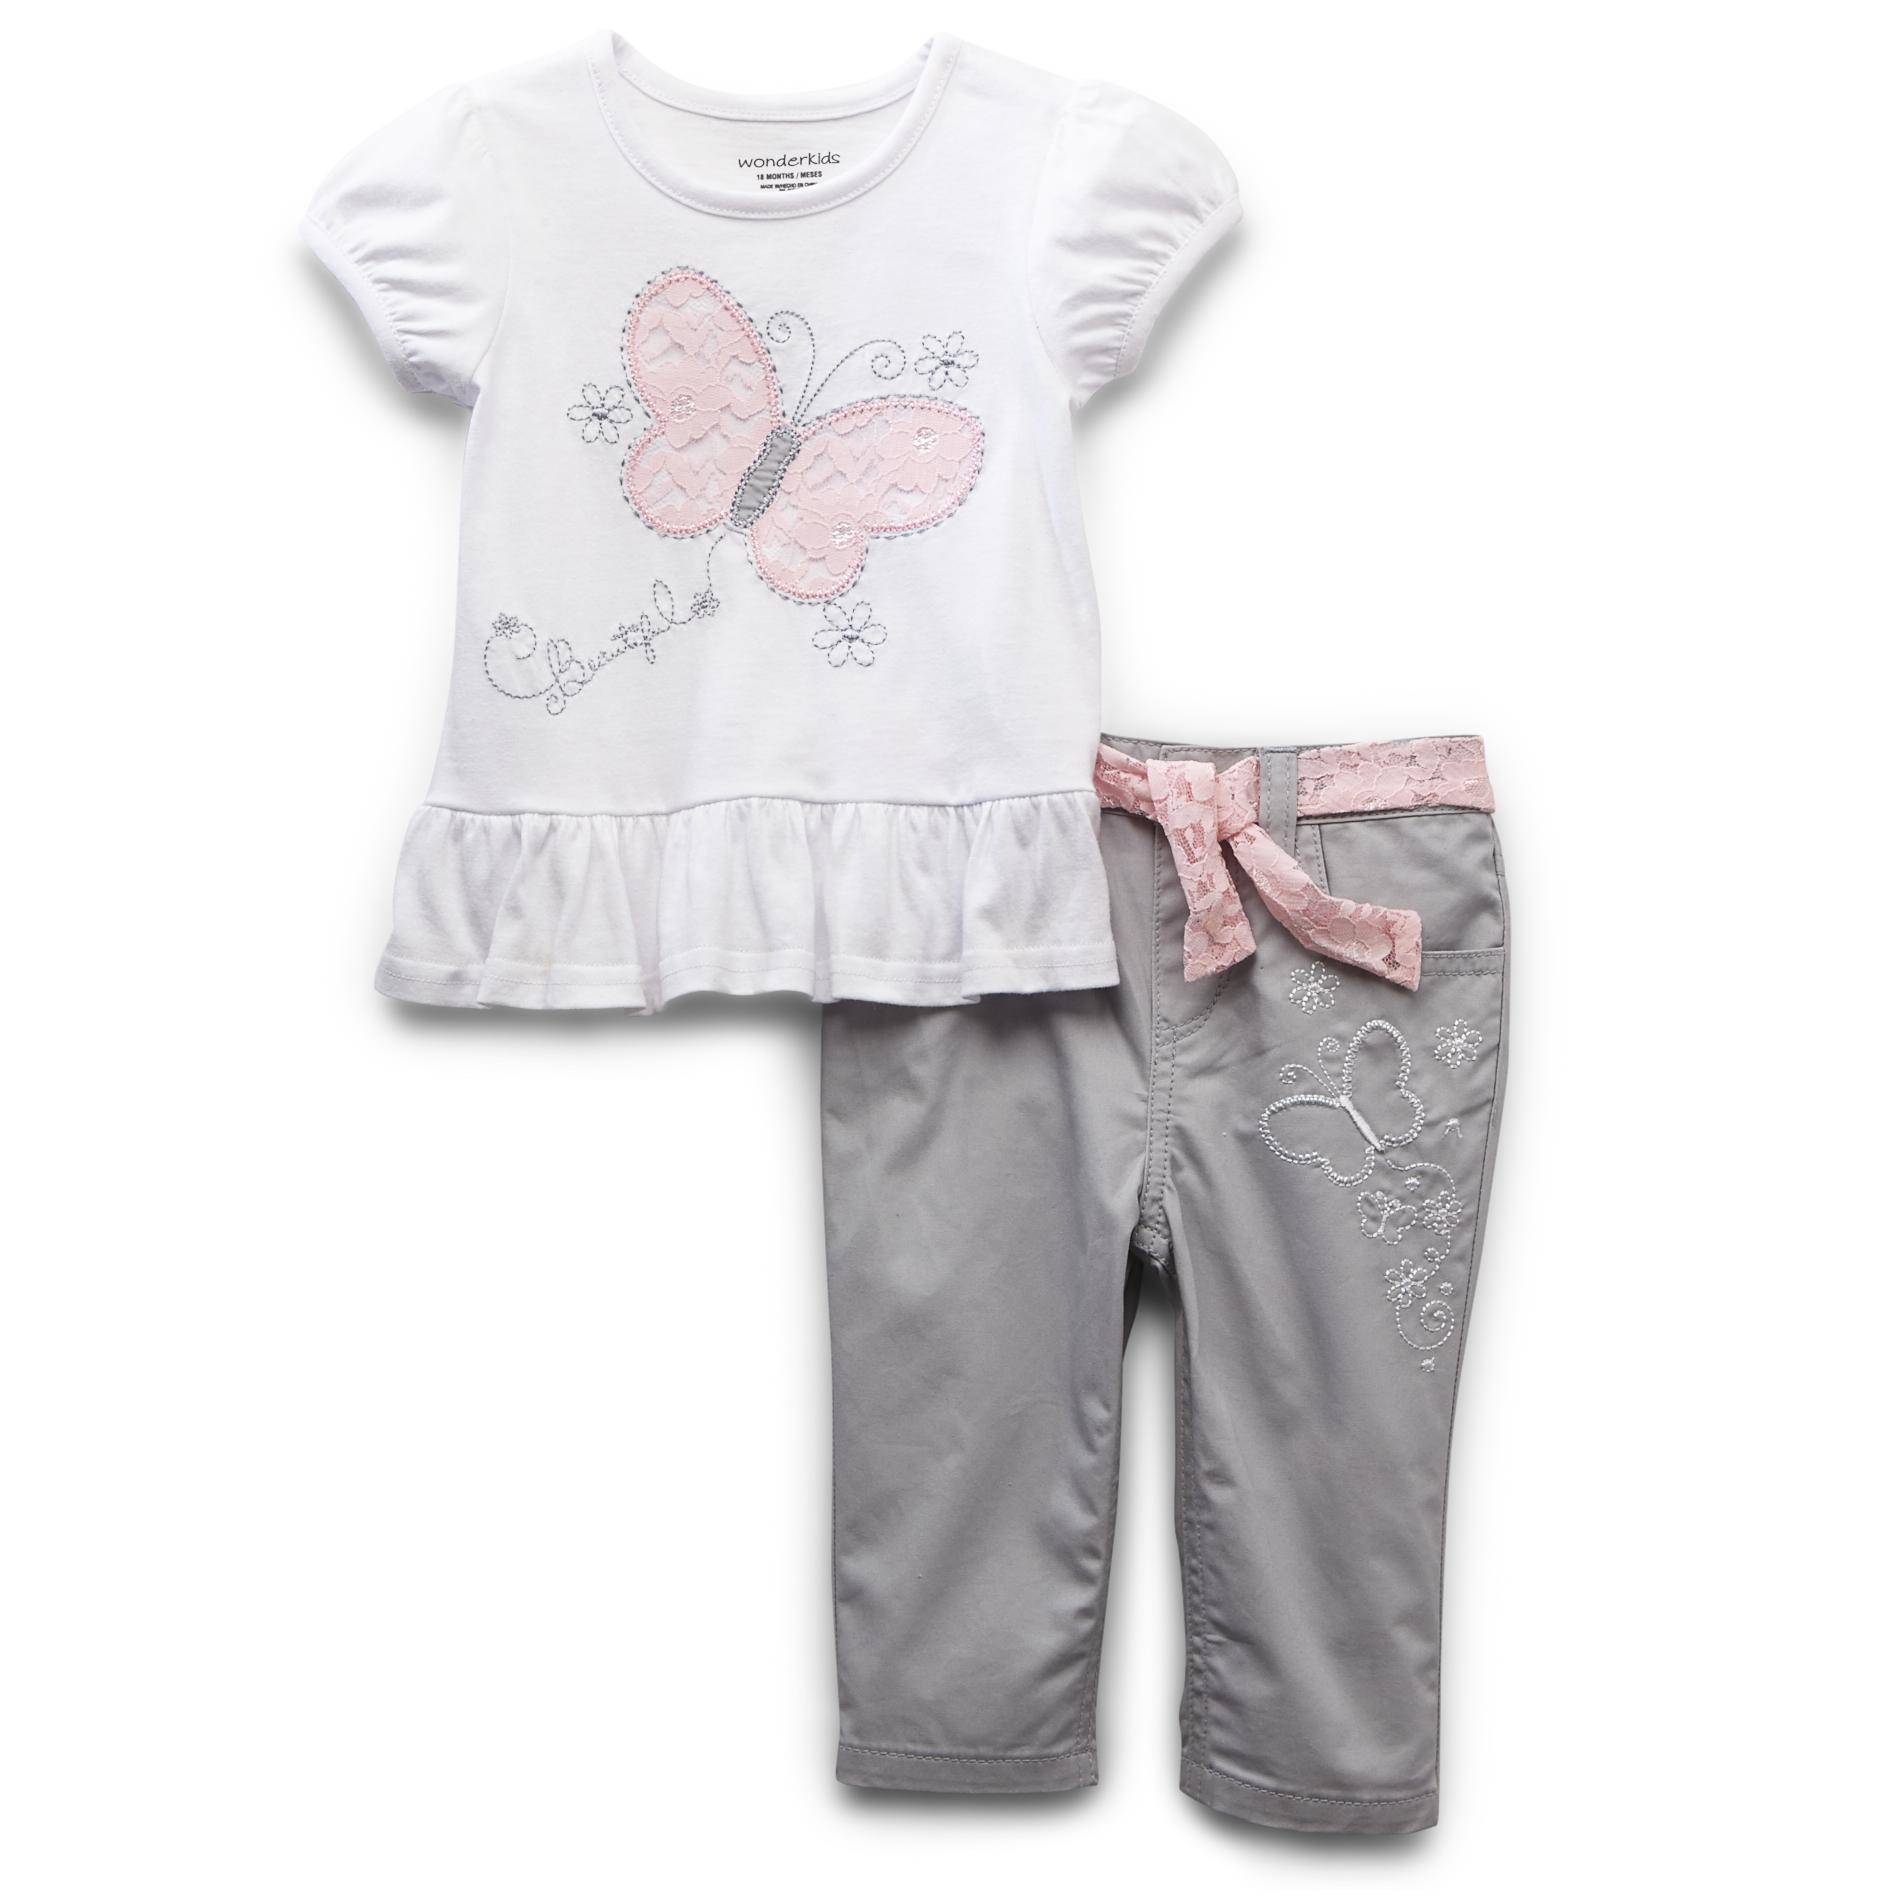 WonderKids Infant & Toddler Girl's Top & Twill Pants - Butterfly